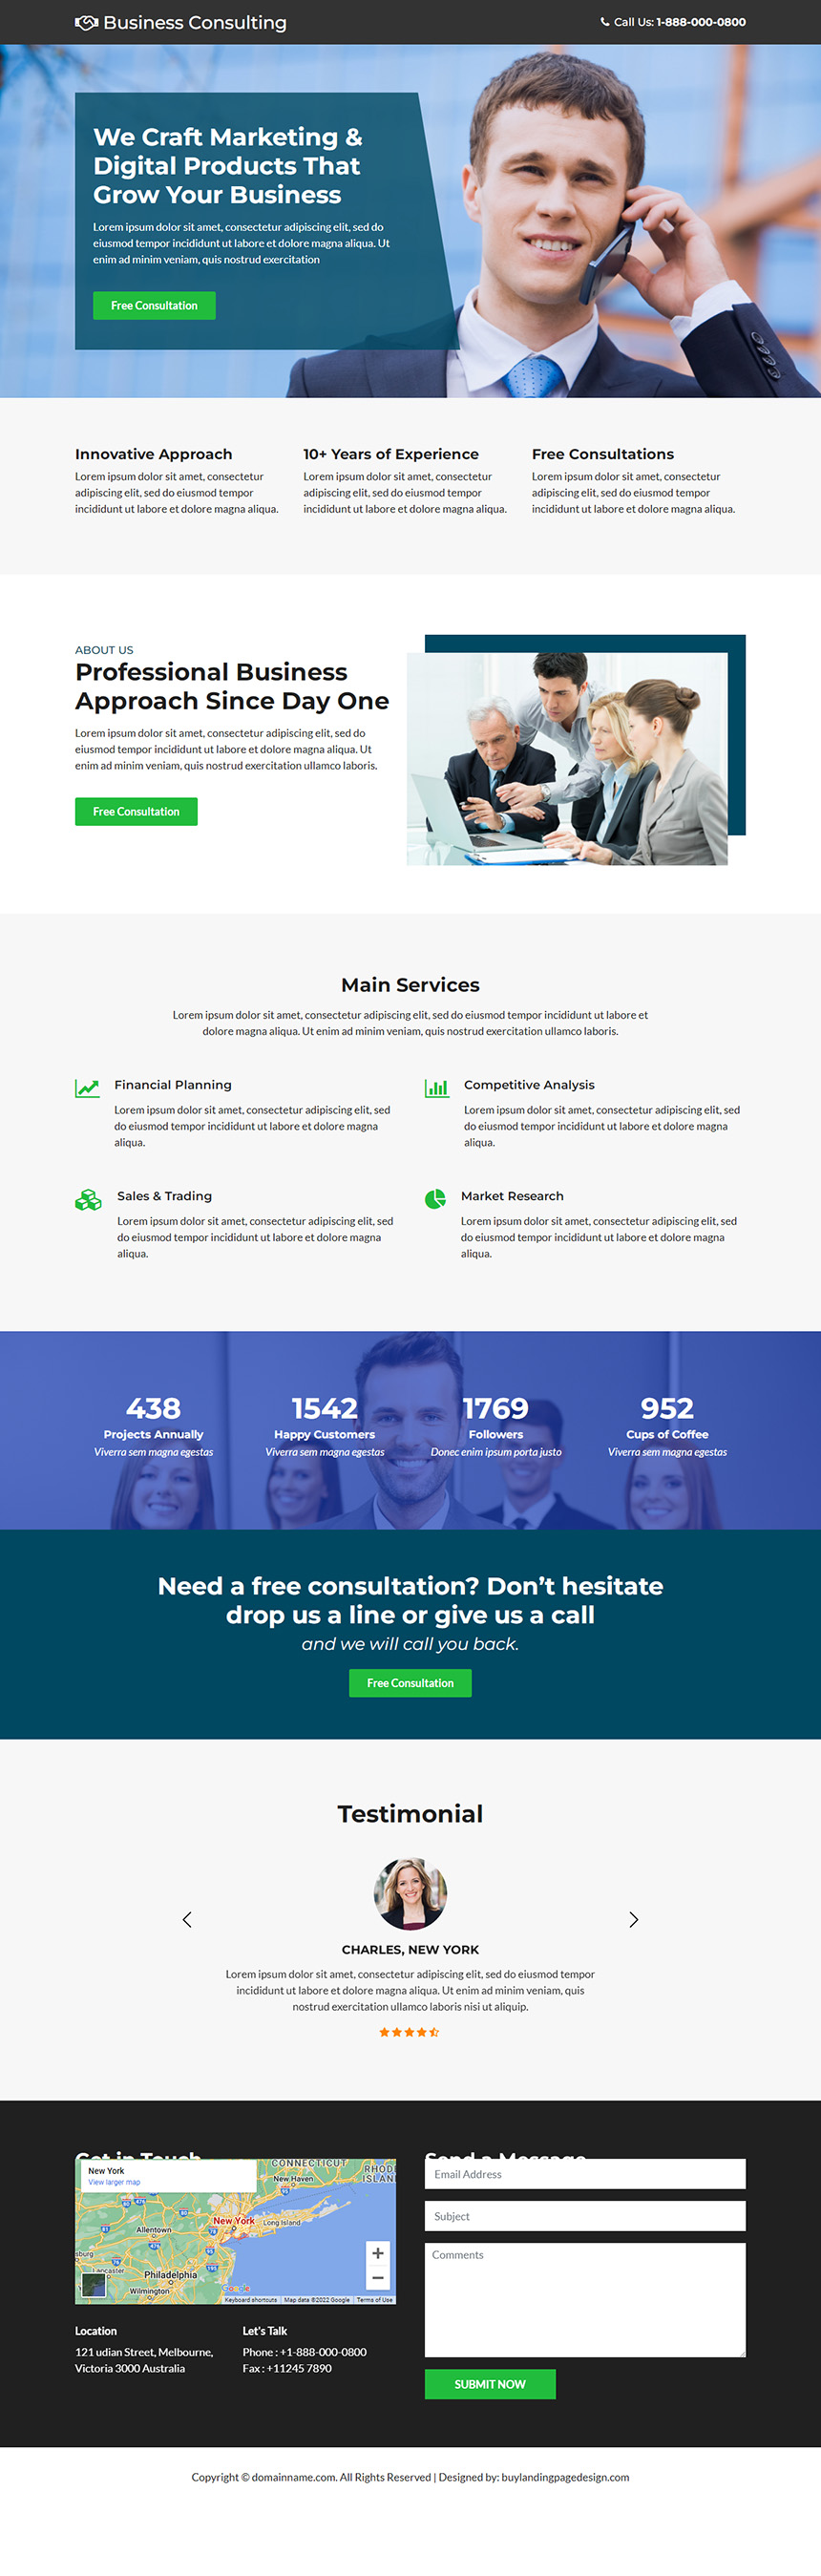 professional business consulting service responsive landing page